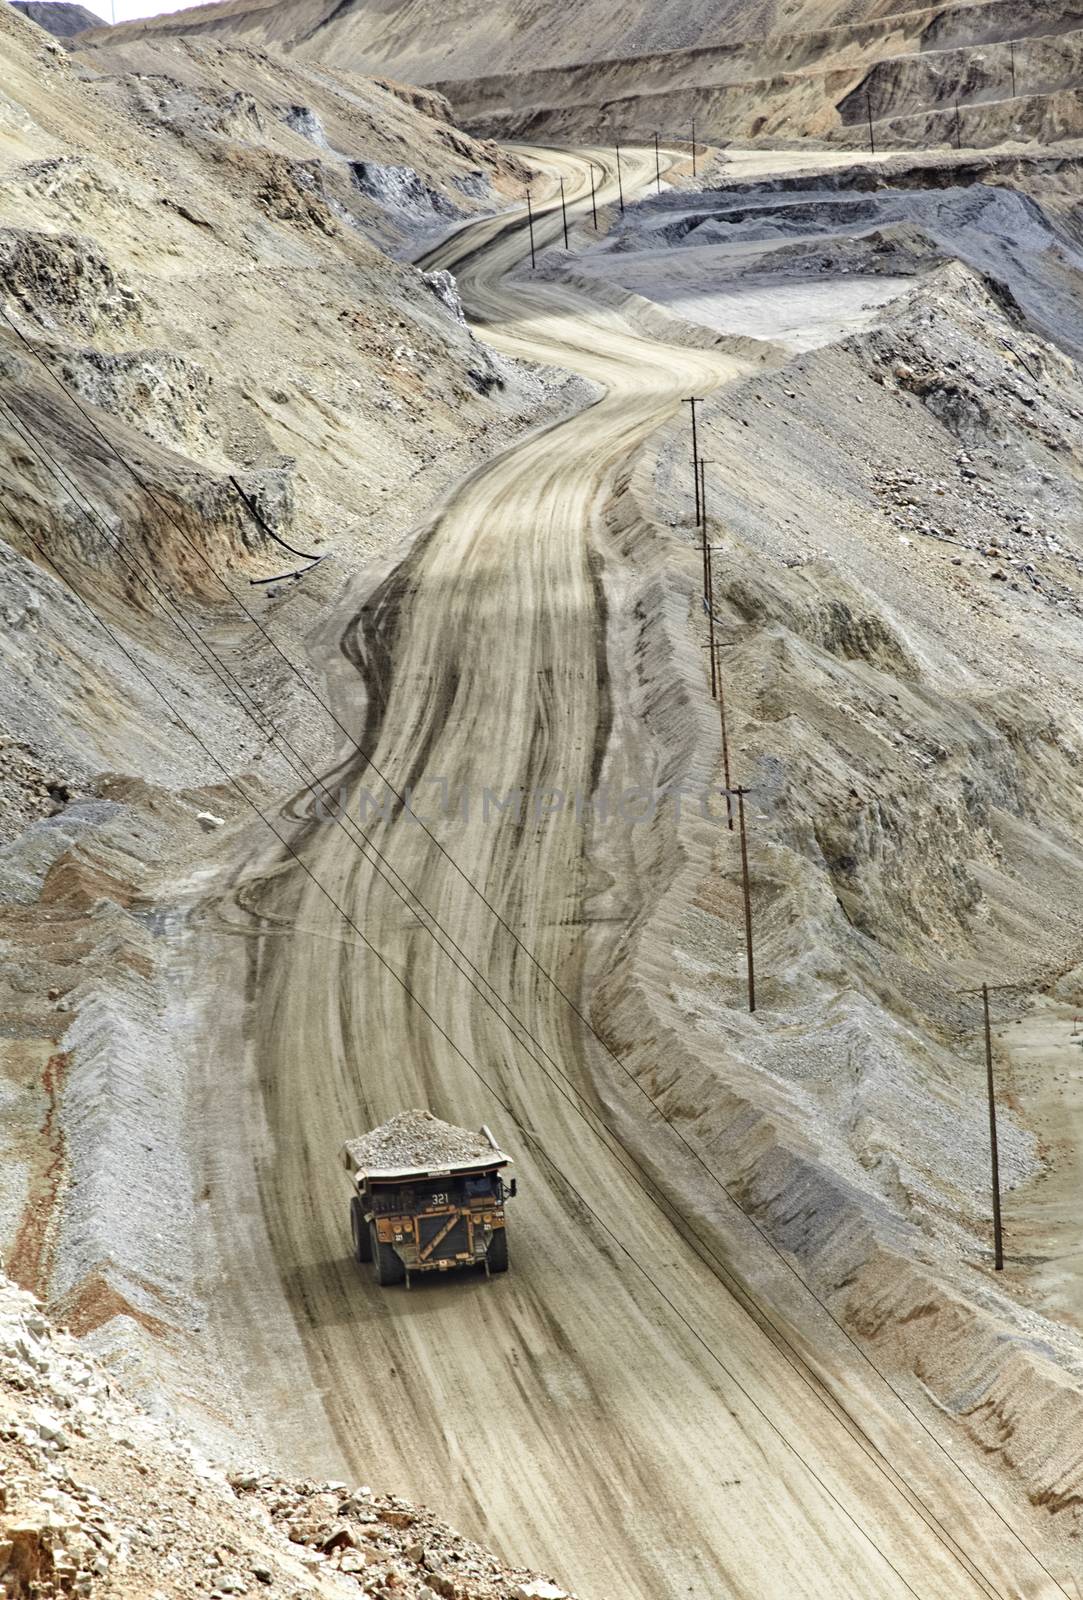 Excavation open pit mine Kennecott, copper, gold and silver mine operation outside Salt Lake City